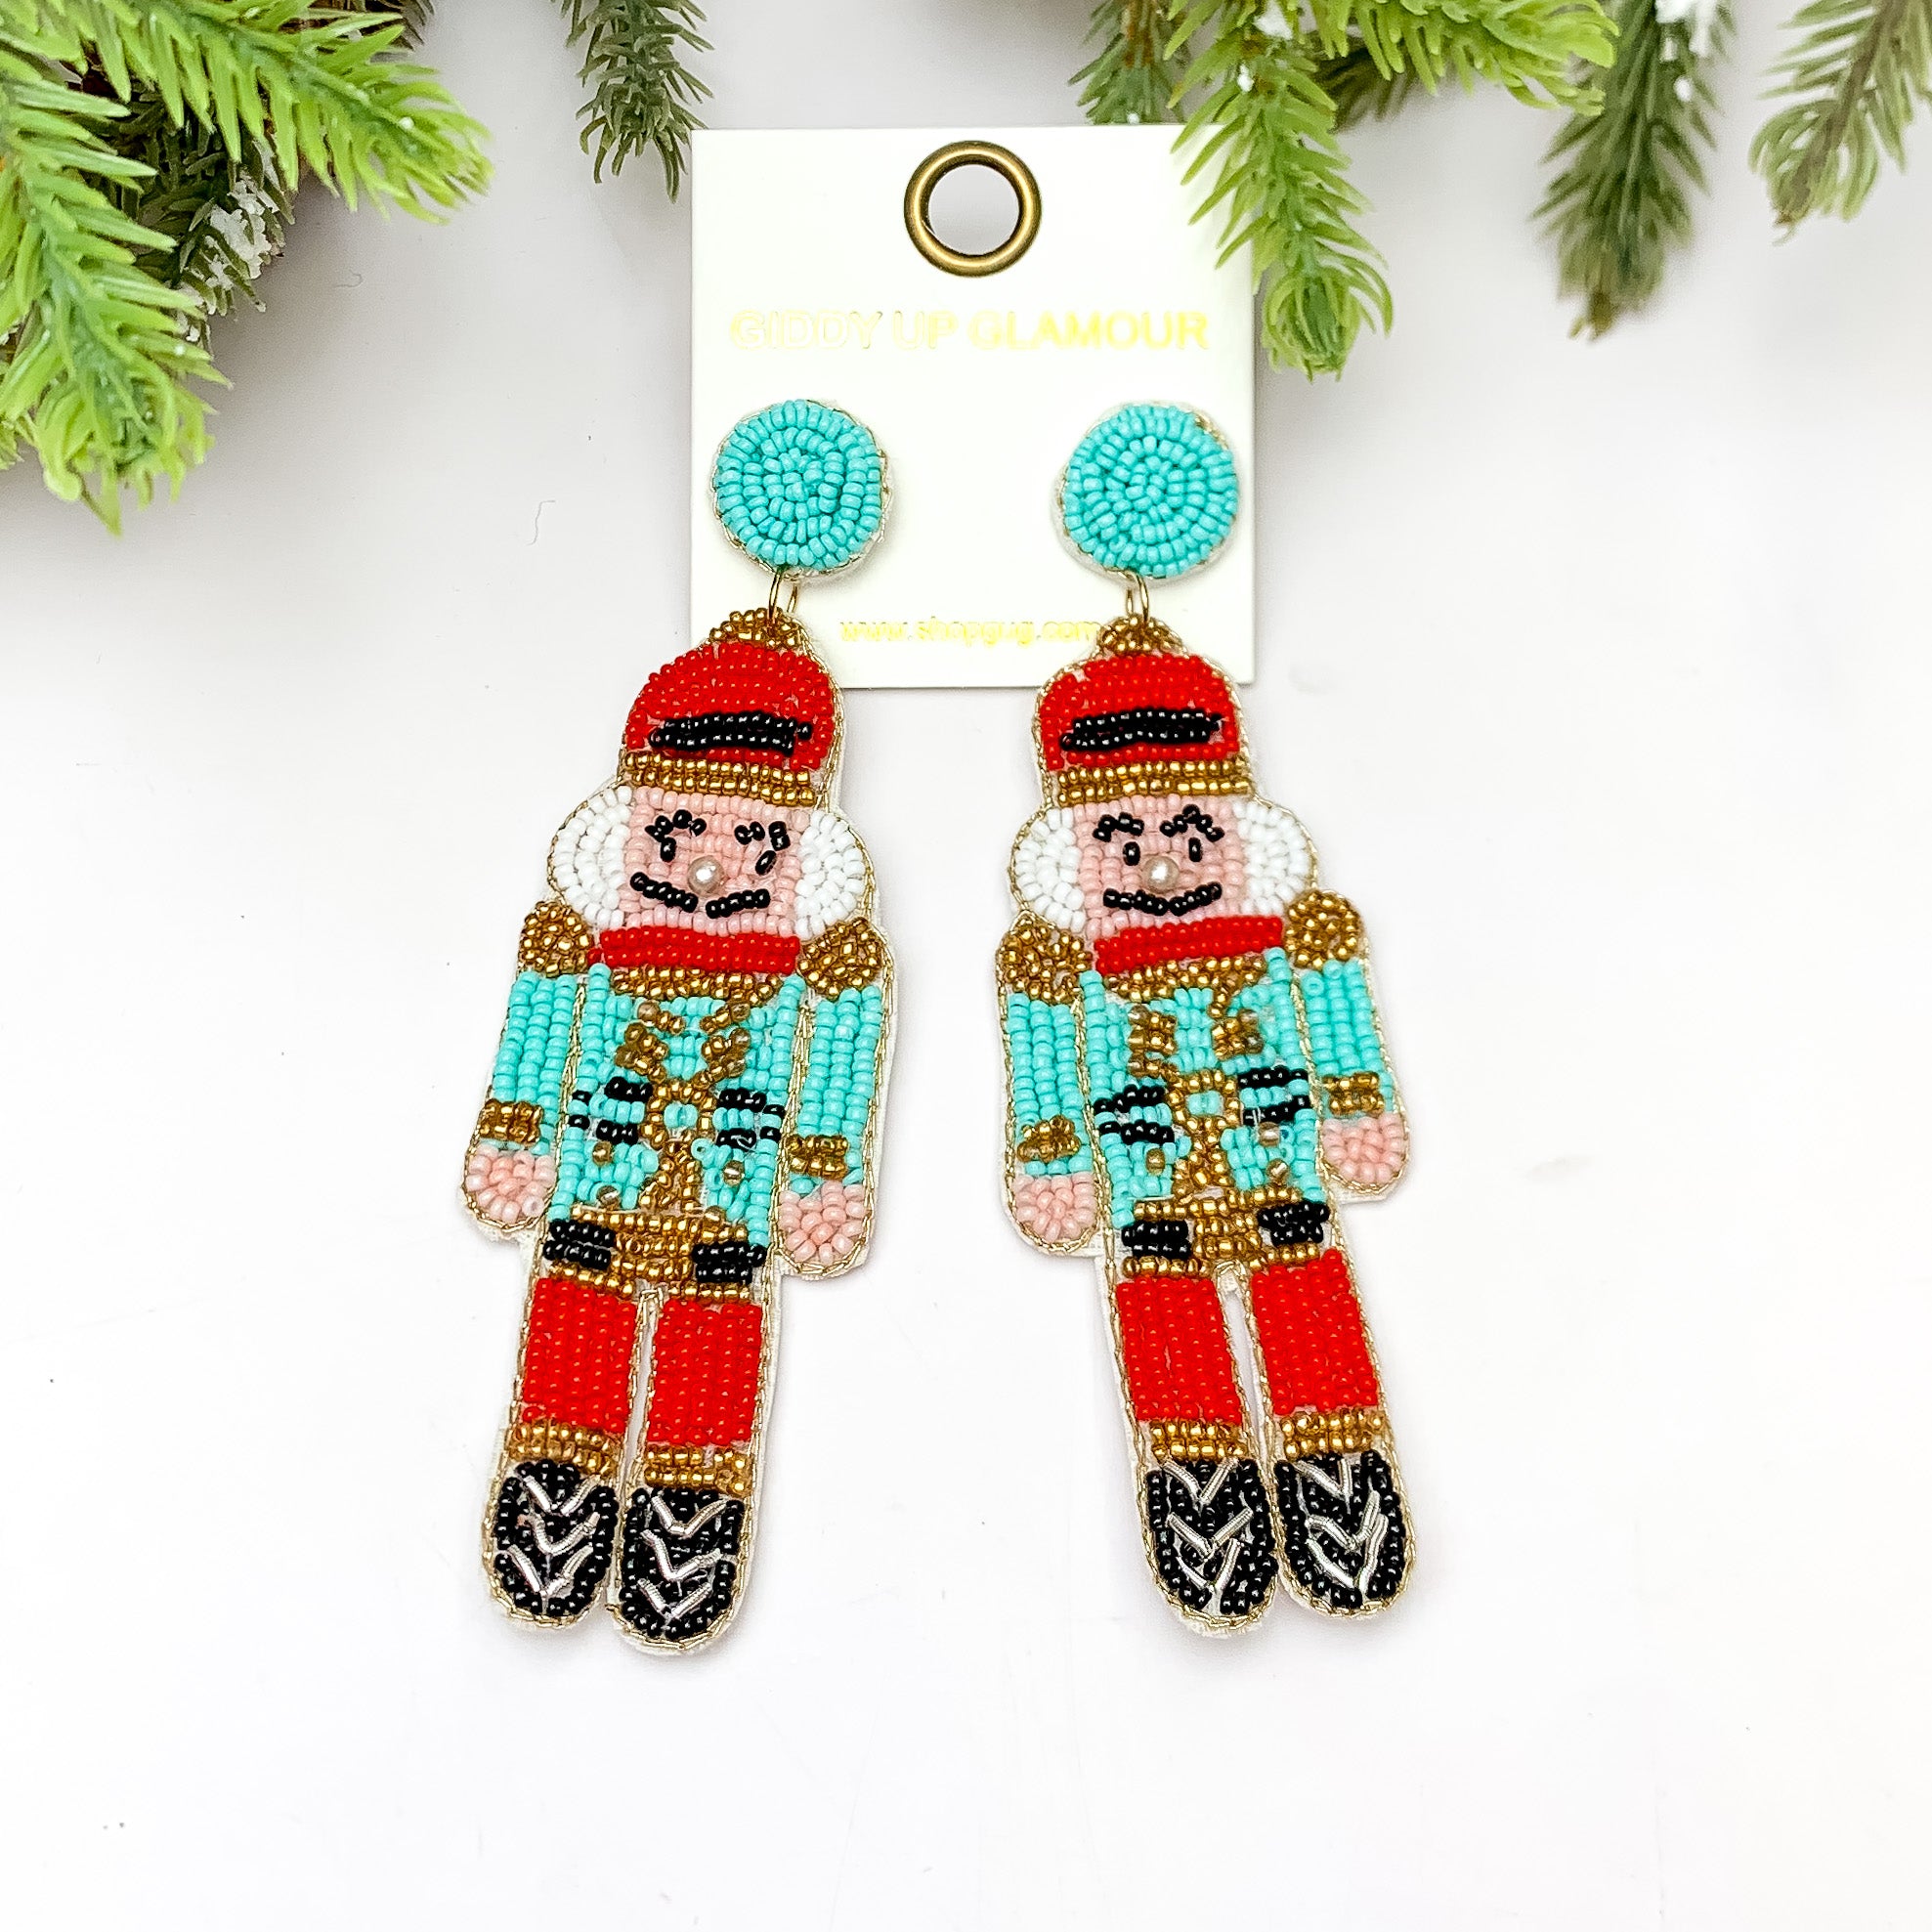 Nutcracker Beaded Earrings in Turquoise Blue - Giddy Up Glamour Boutique